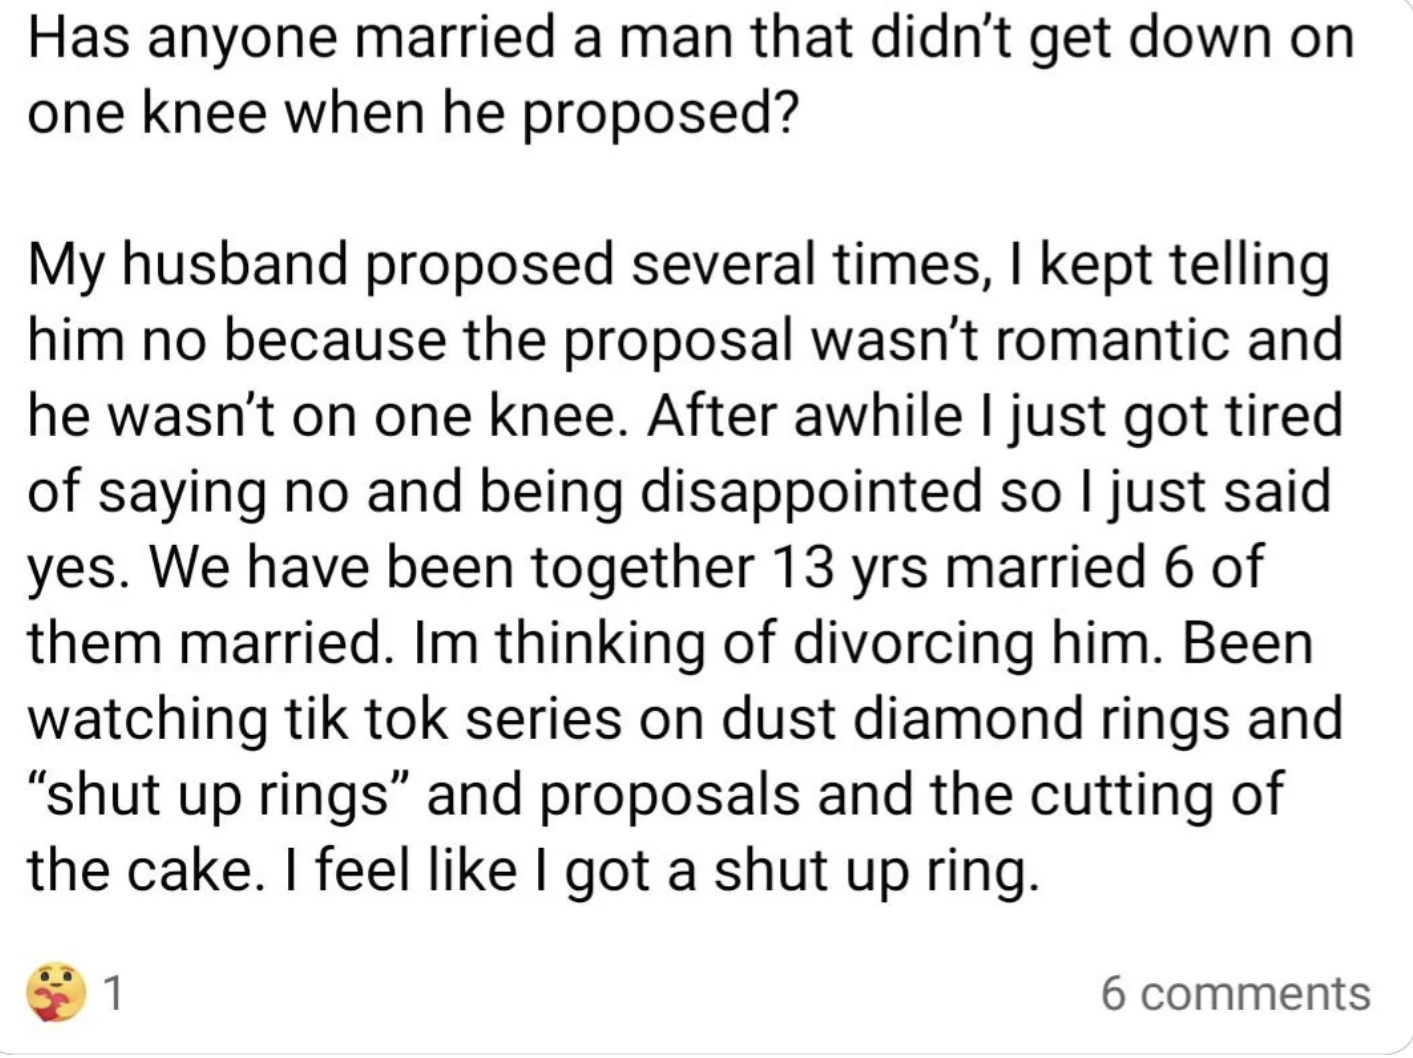 &quot;My husband proposed several times...&quot;